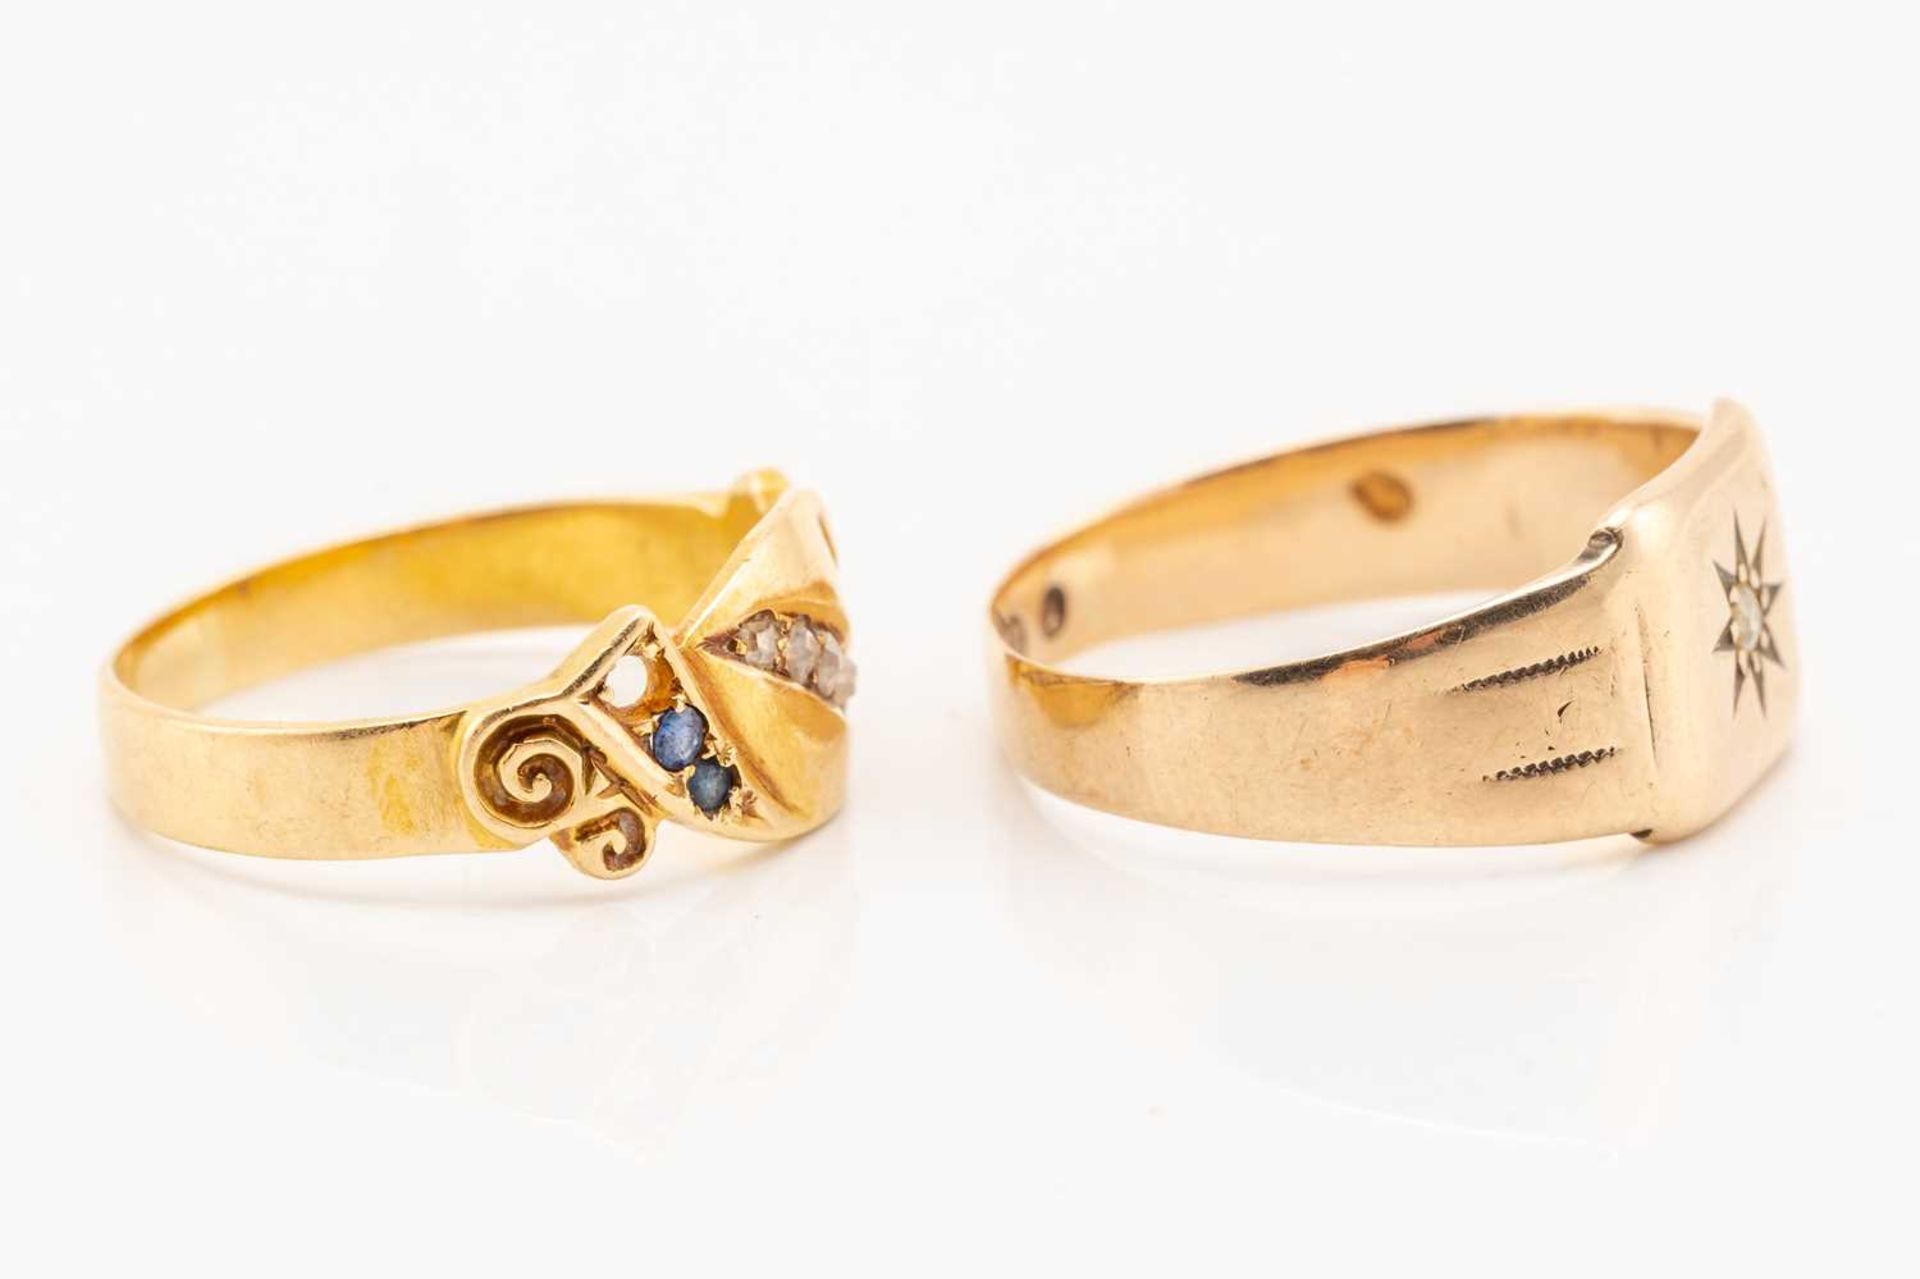 An Edwardian gem-set dress ring in 18ct gold and a diamond-set signet ring; the first ring comprises - Image 2 of 6